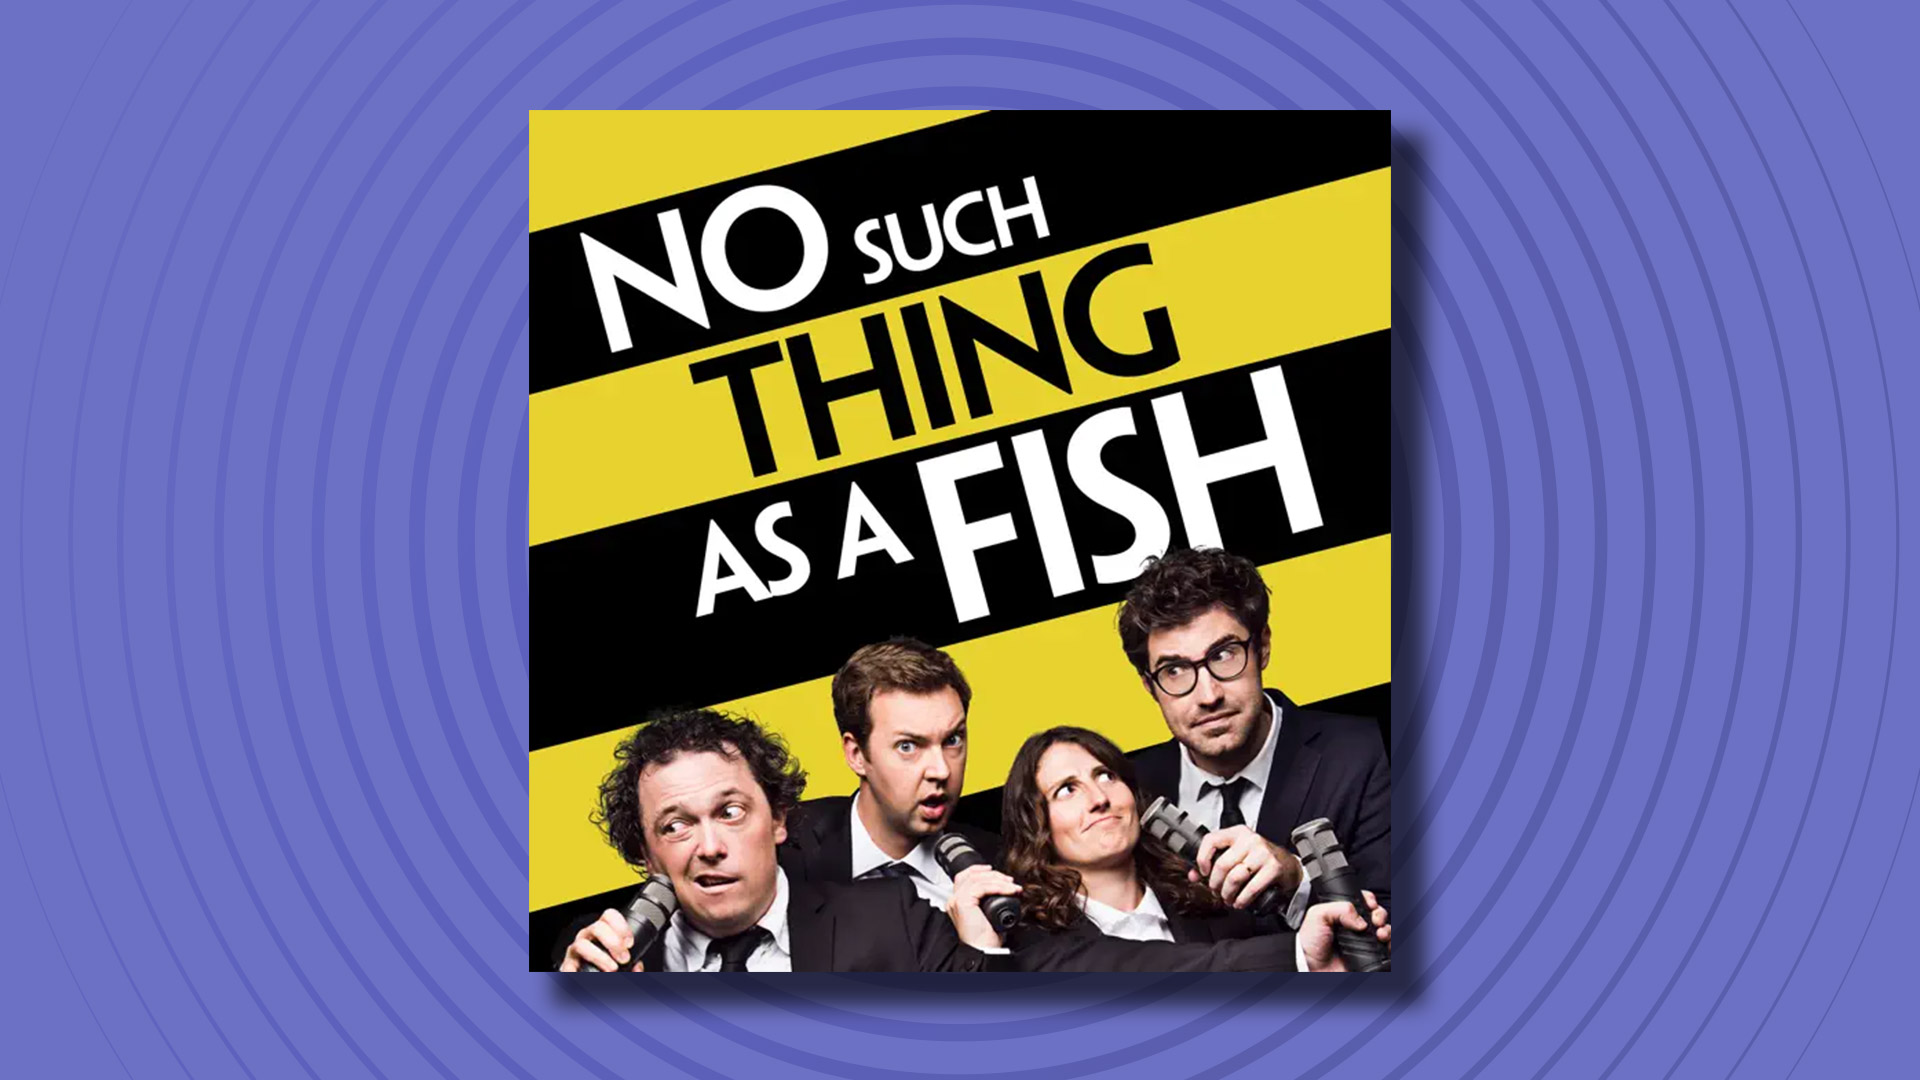 The logo of the No Such Thing as a Fish podcast on a purple background